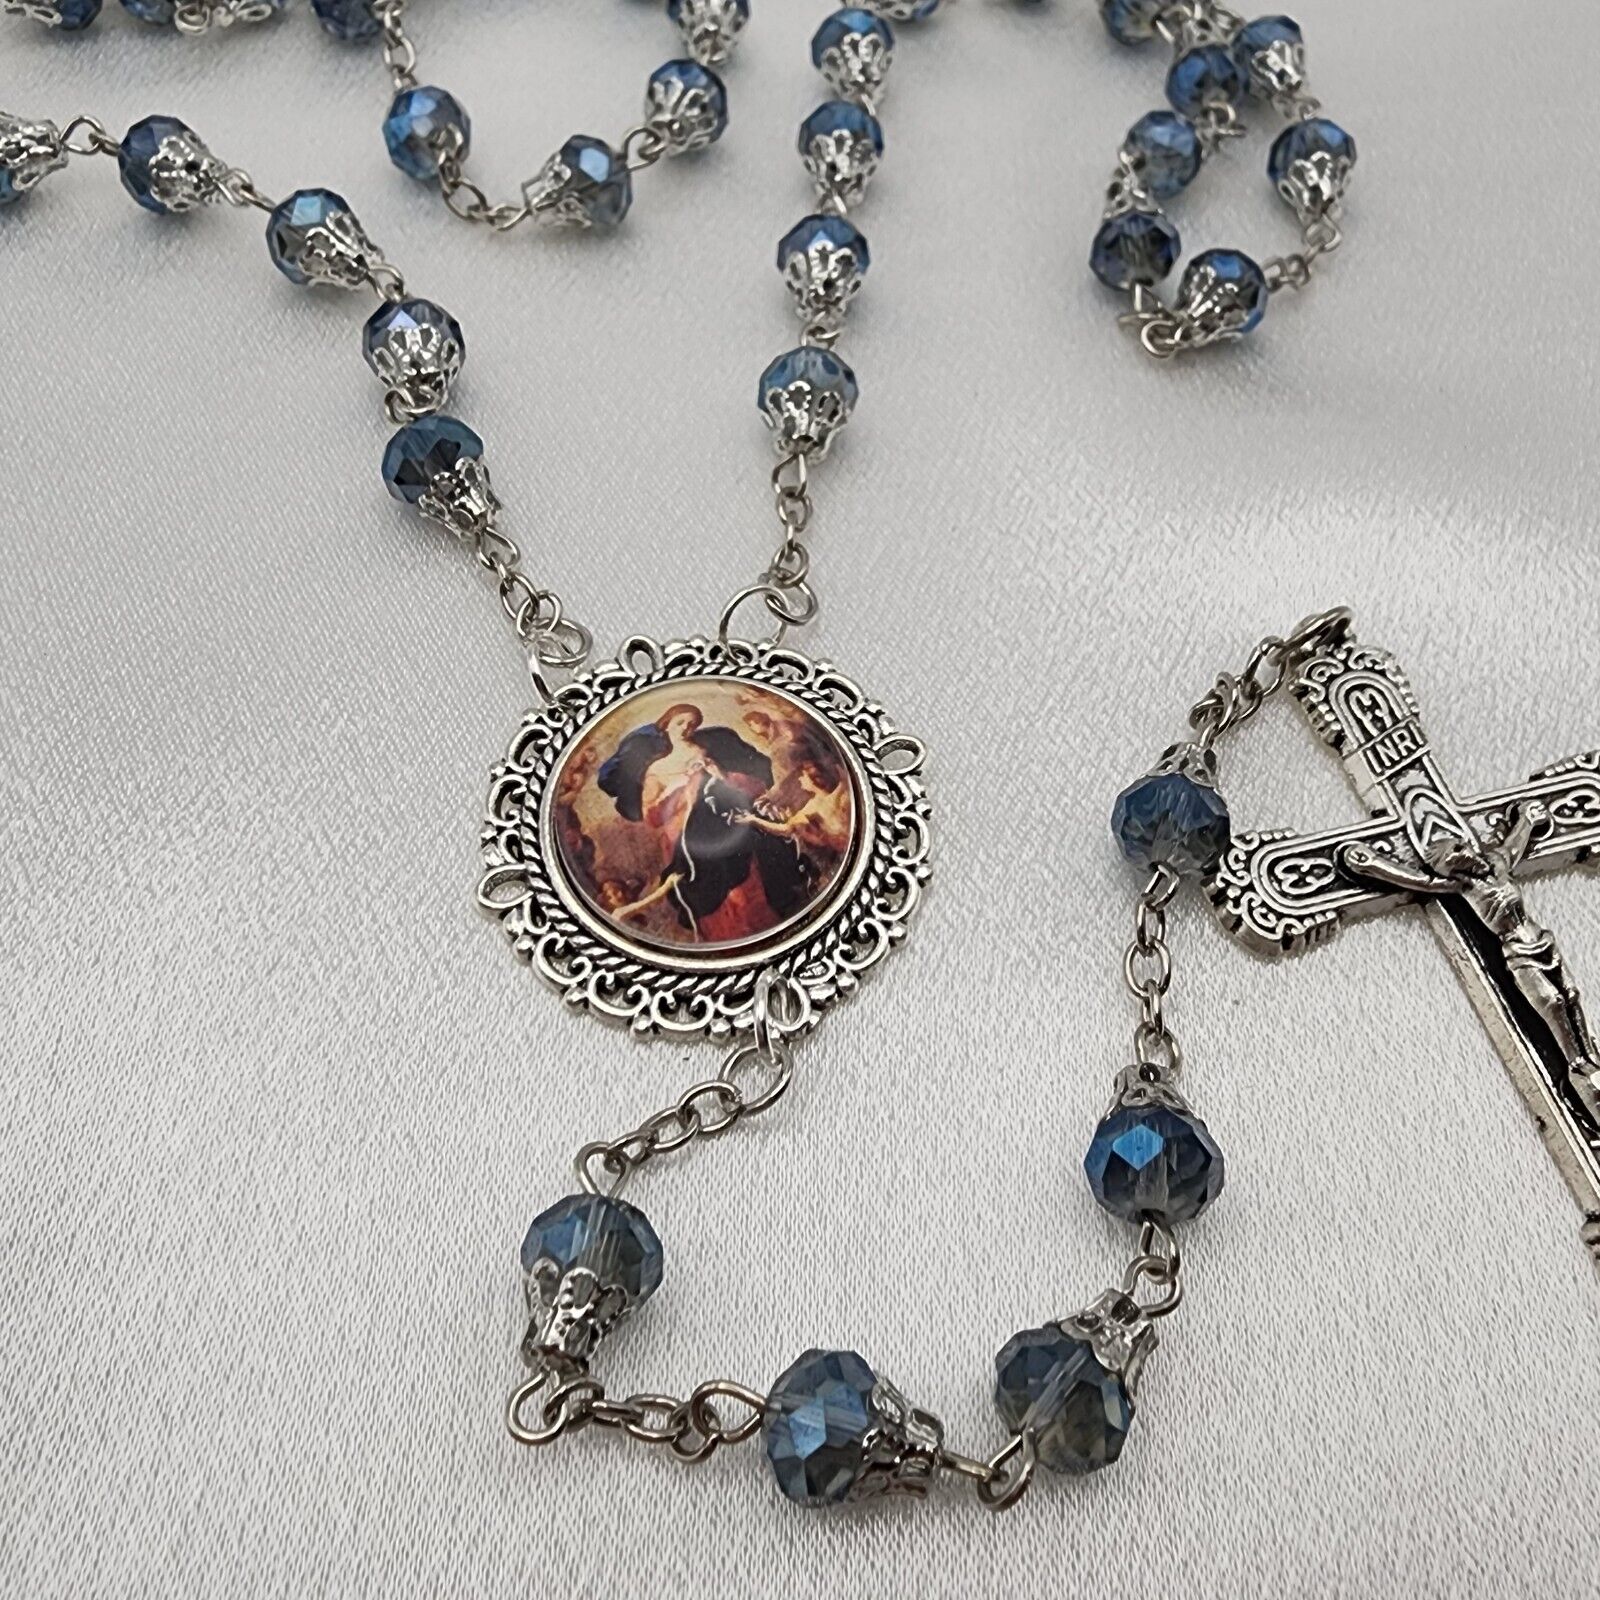 Our Lady Mary Untier/Undoer of Knots Blue Crystal Rosary Handmade Catholic Gift